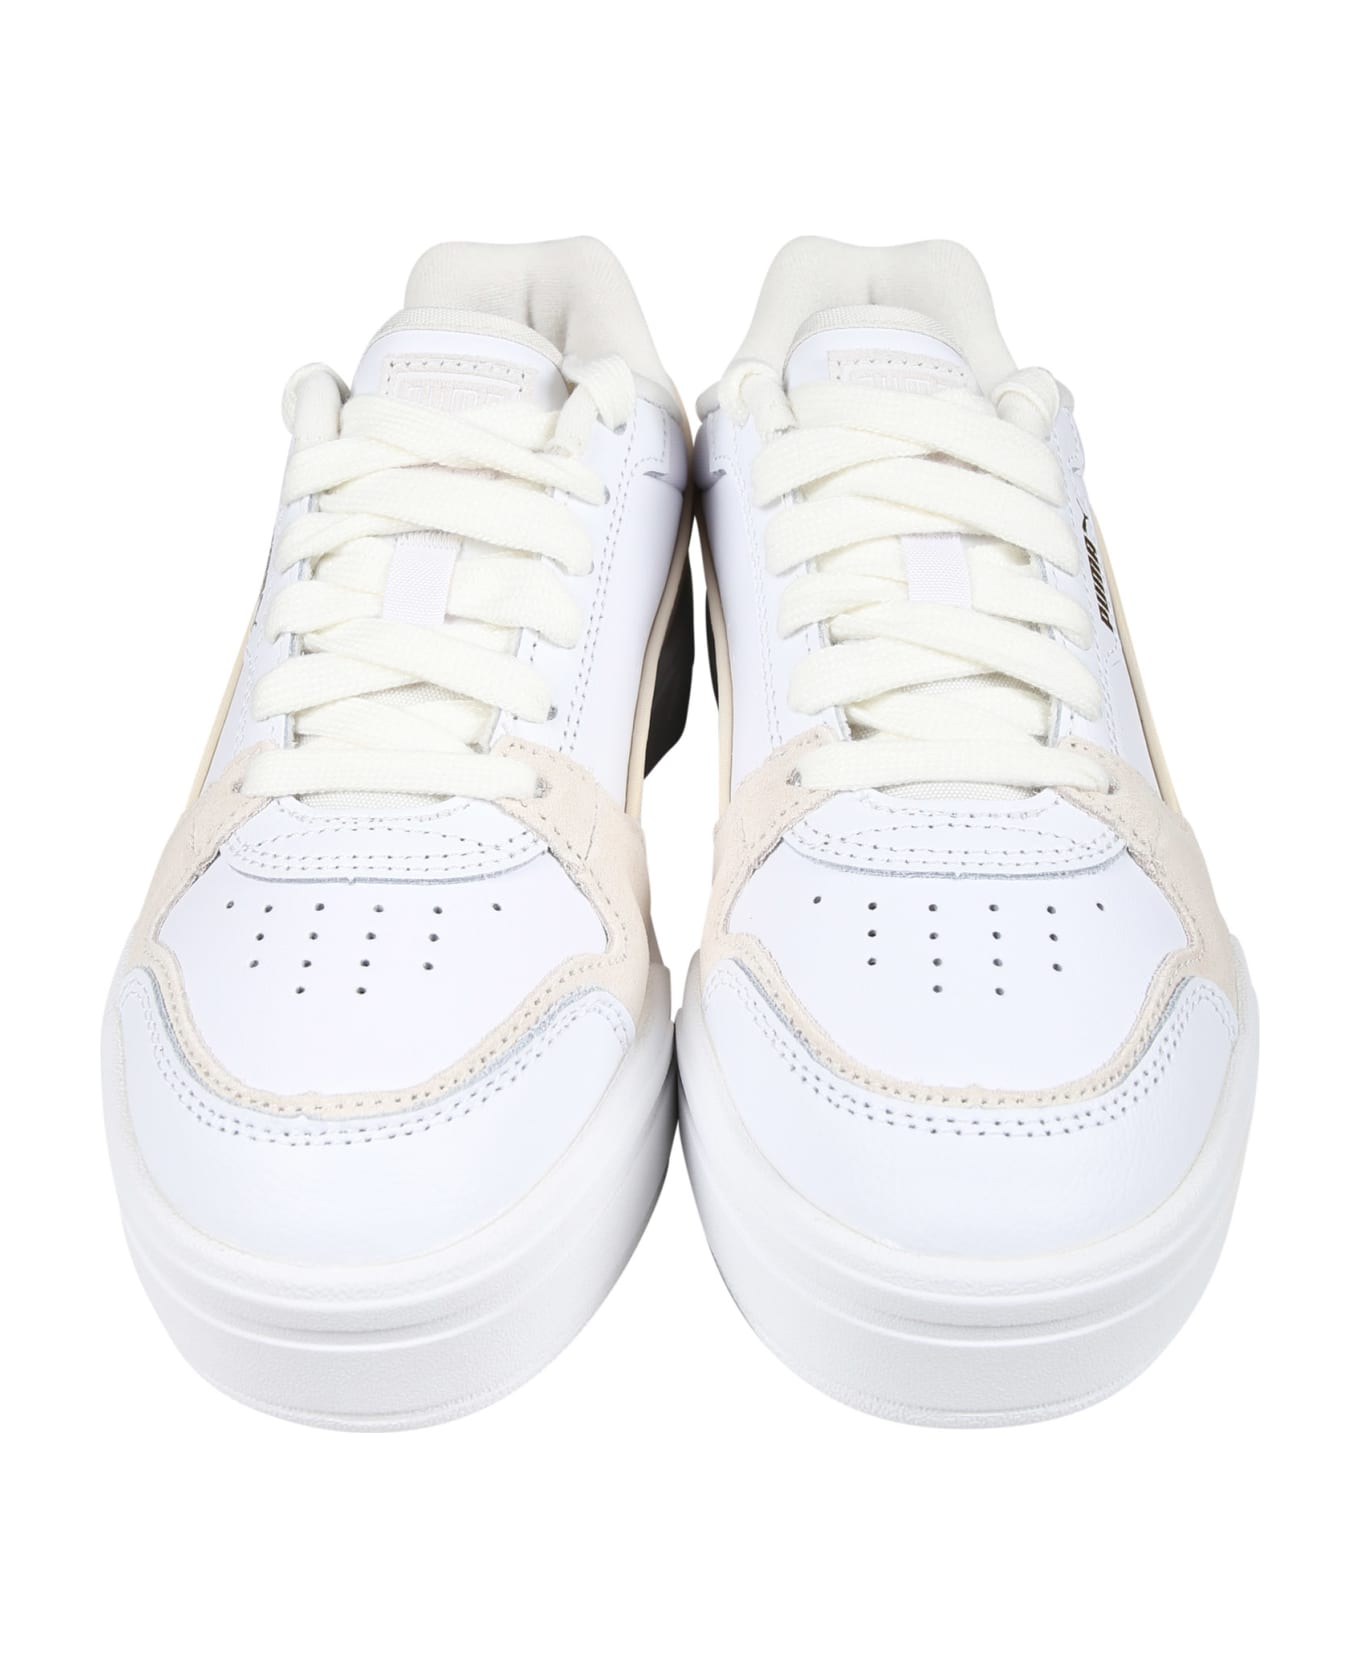 Puma Ca Pro Lux Iii White Low Sneakers For Kids - White シューズ